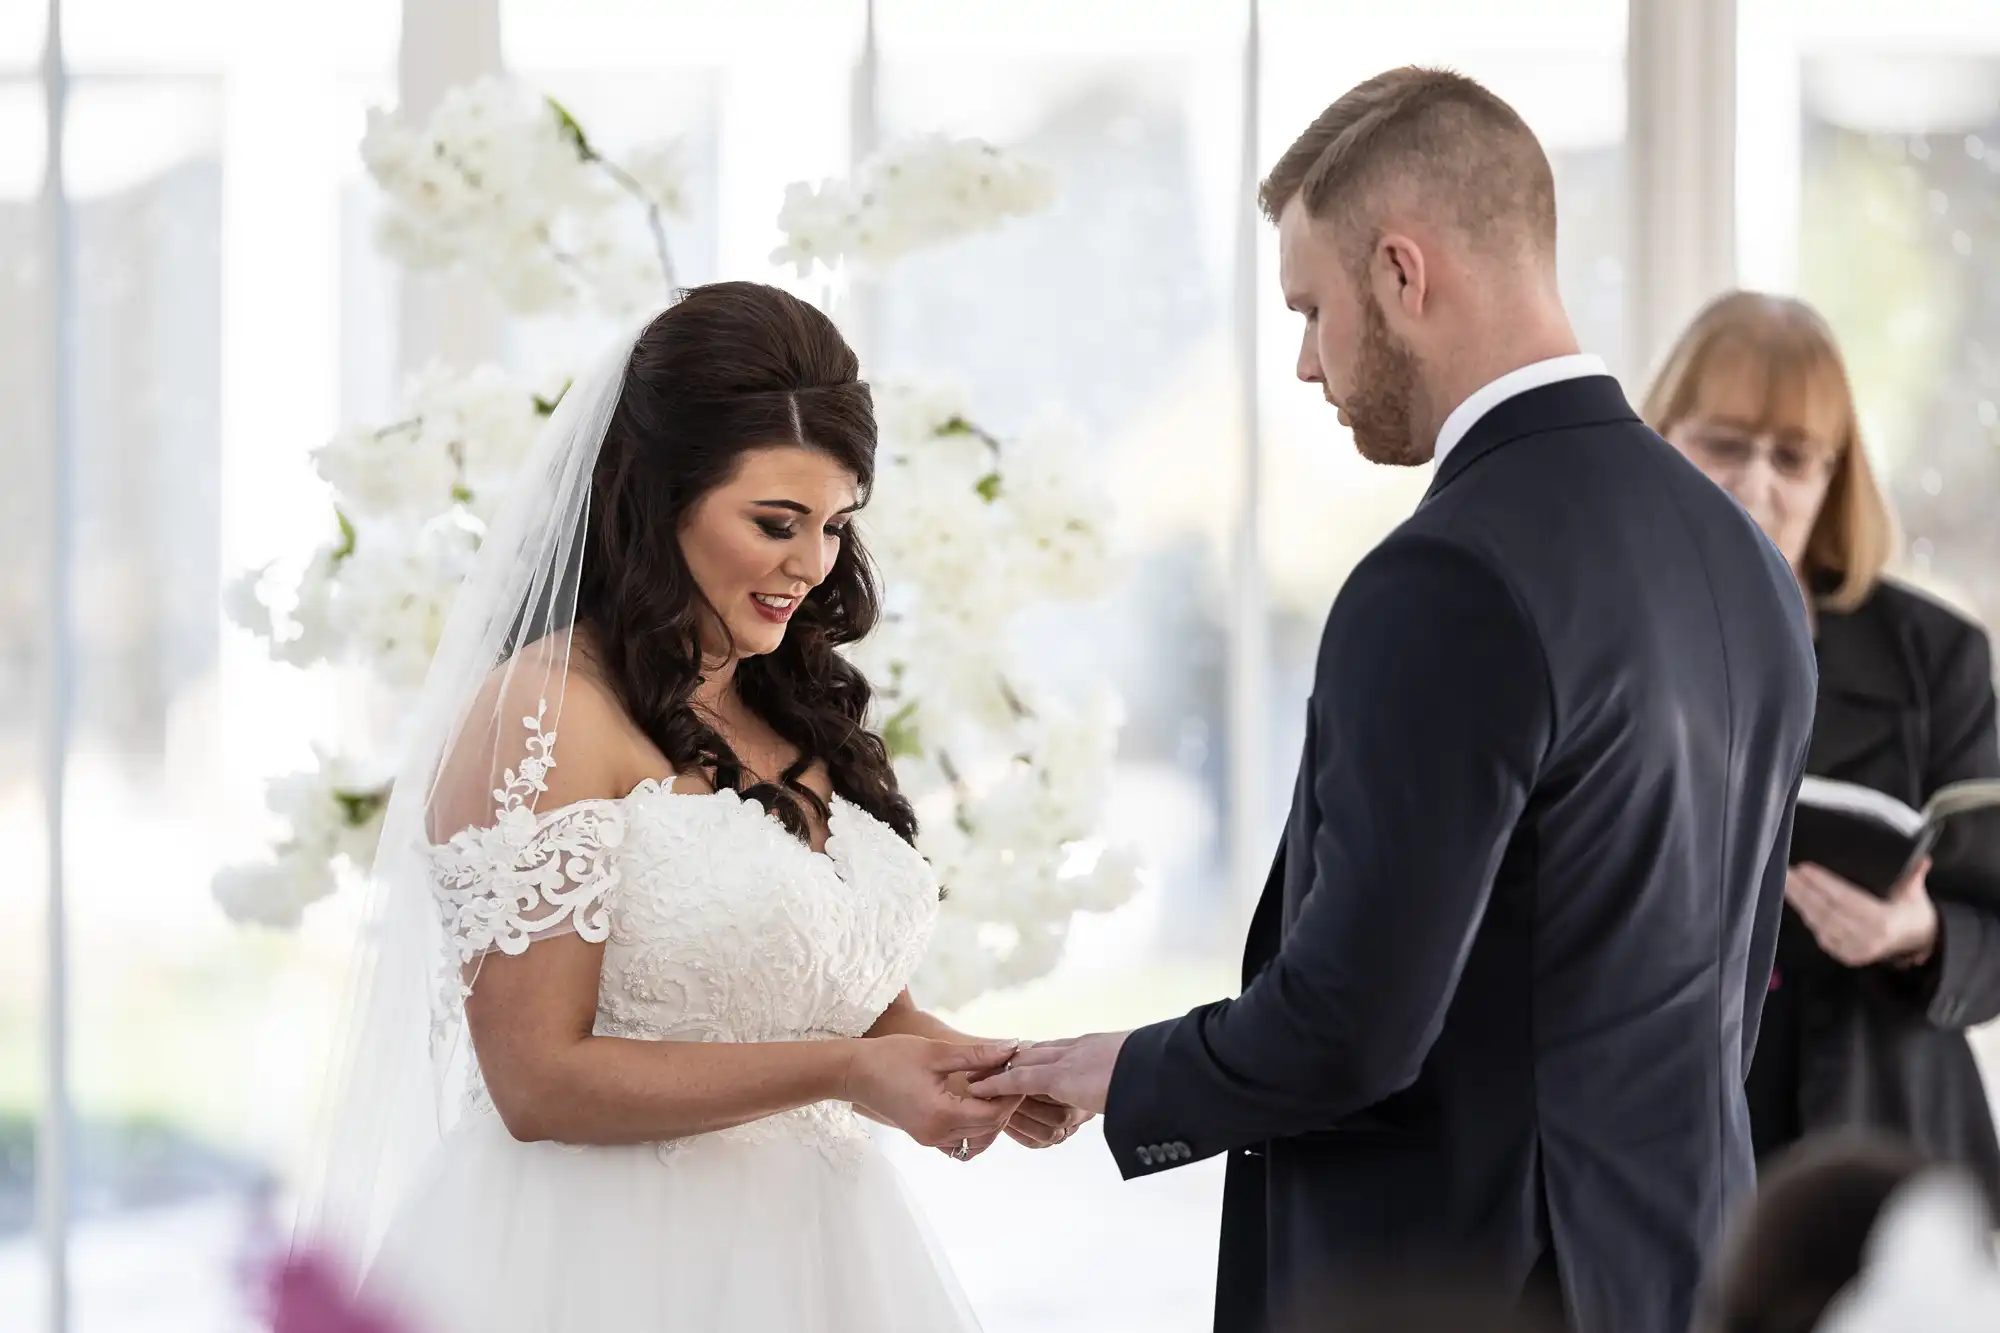 A bride placing a ring on the groom's finger during a wedding ceremony, with an officiant holding a book in the background.